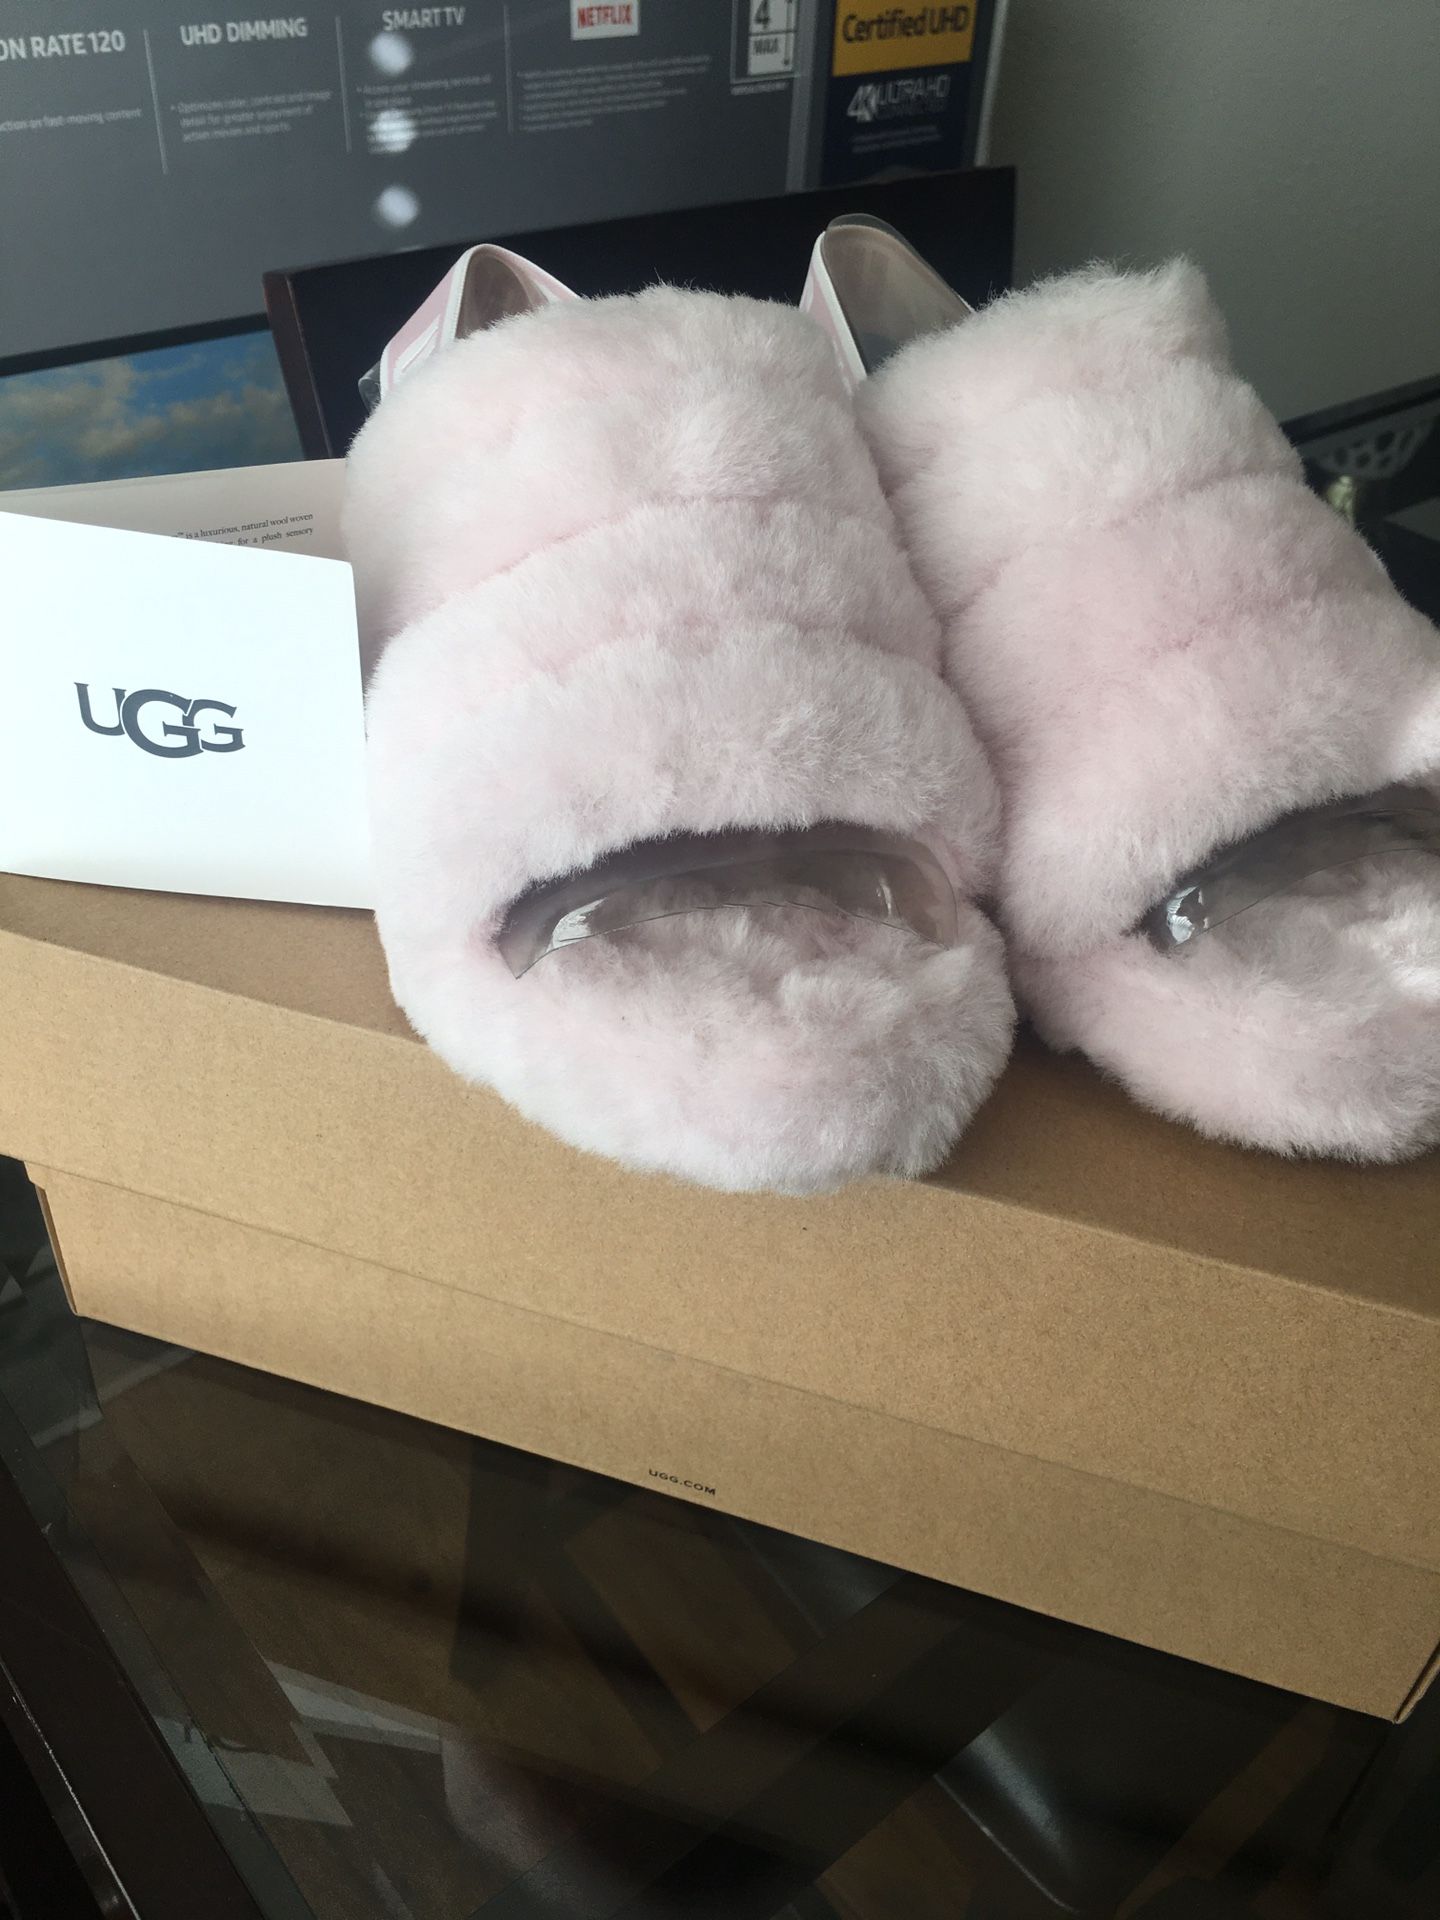 Pink Ugg Slippers